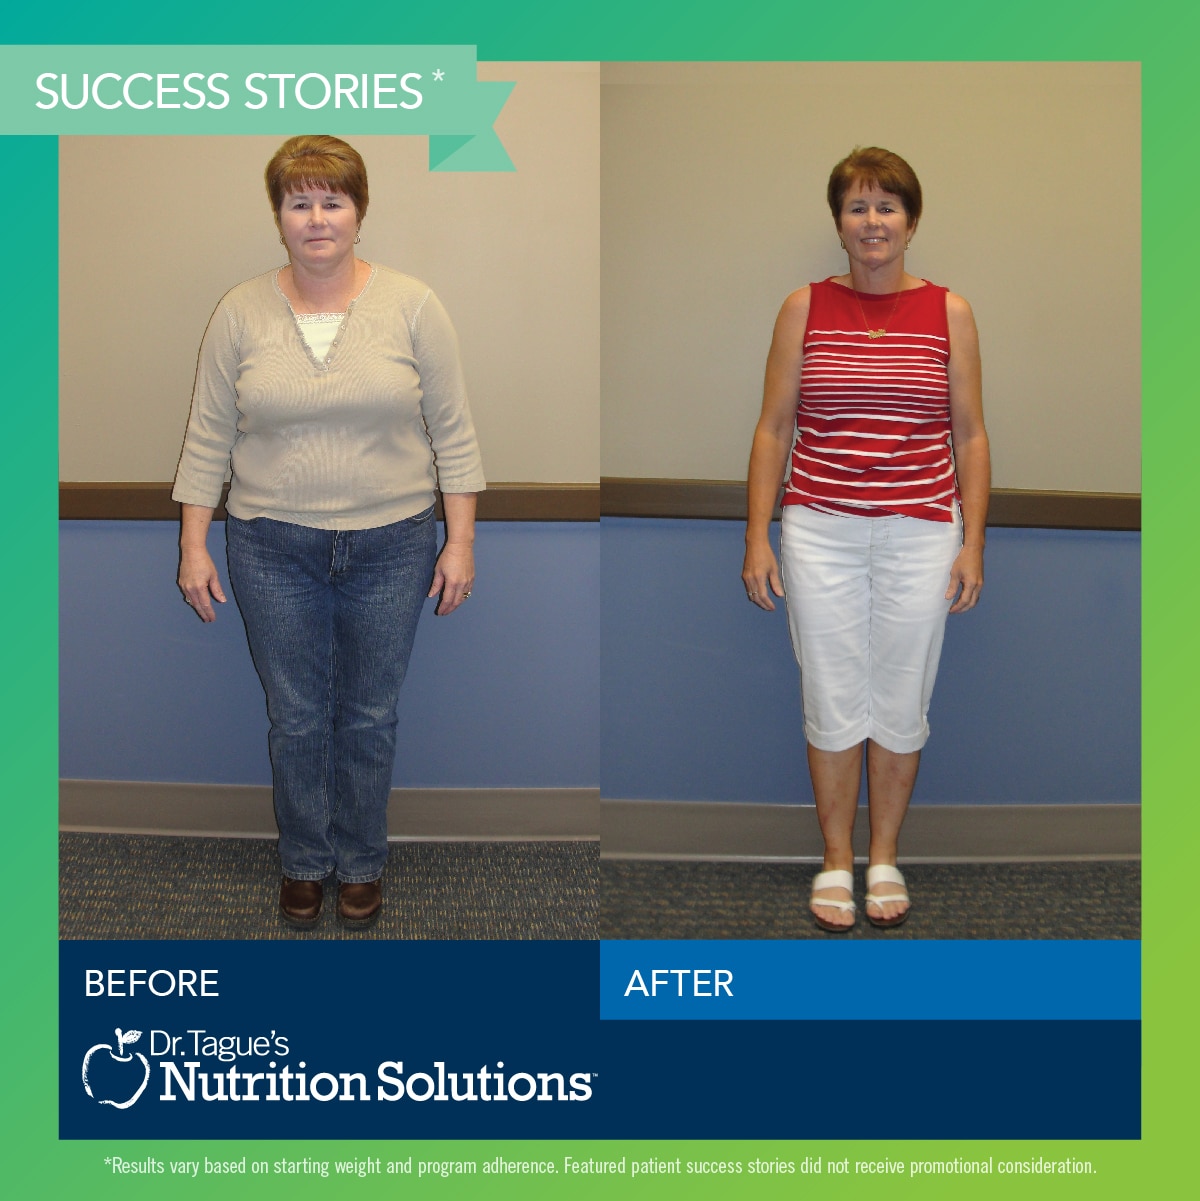 Helene lost 65lbs. on Dr. Tague's Program!